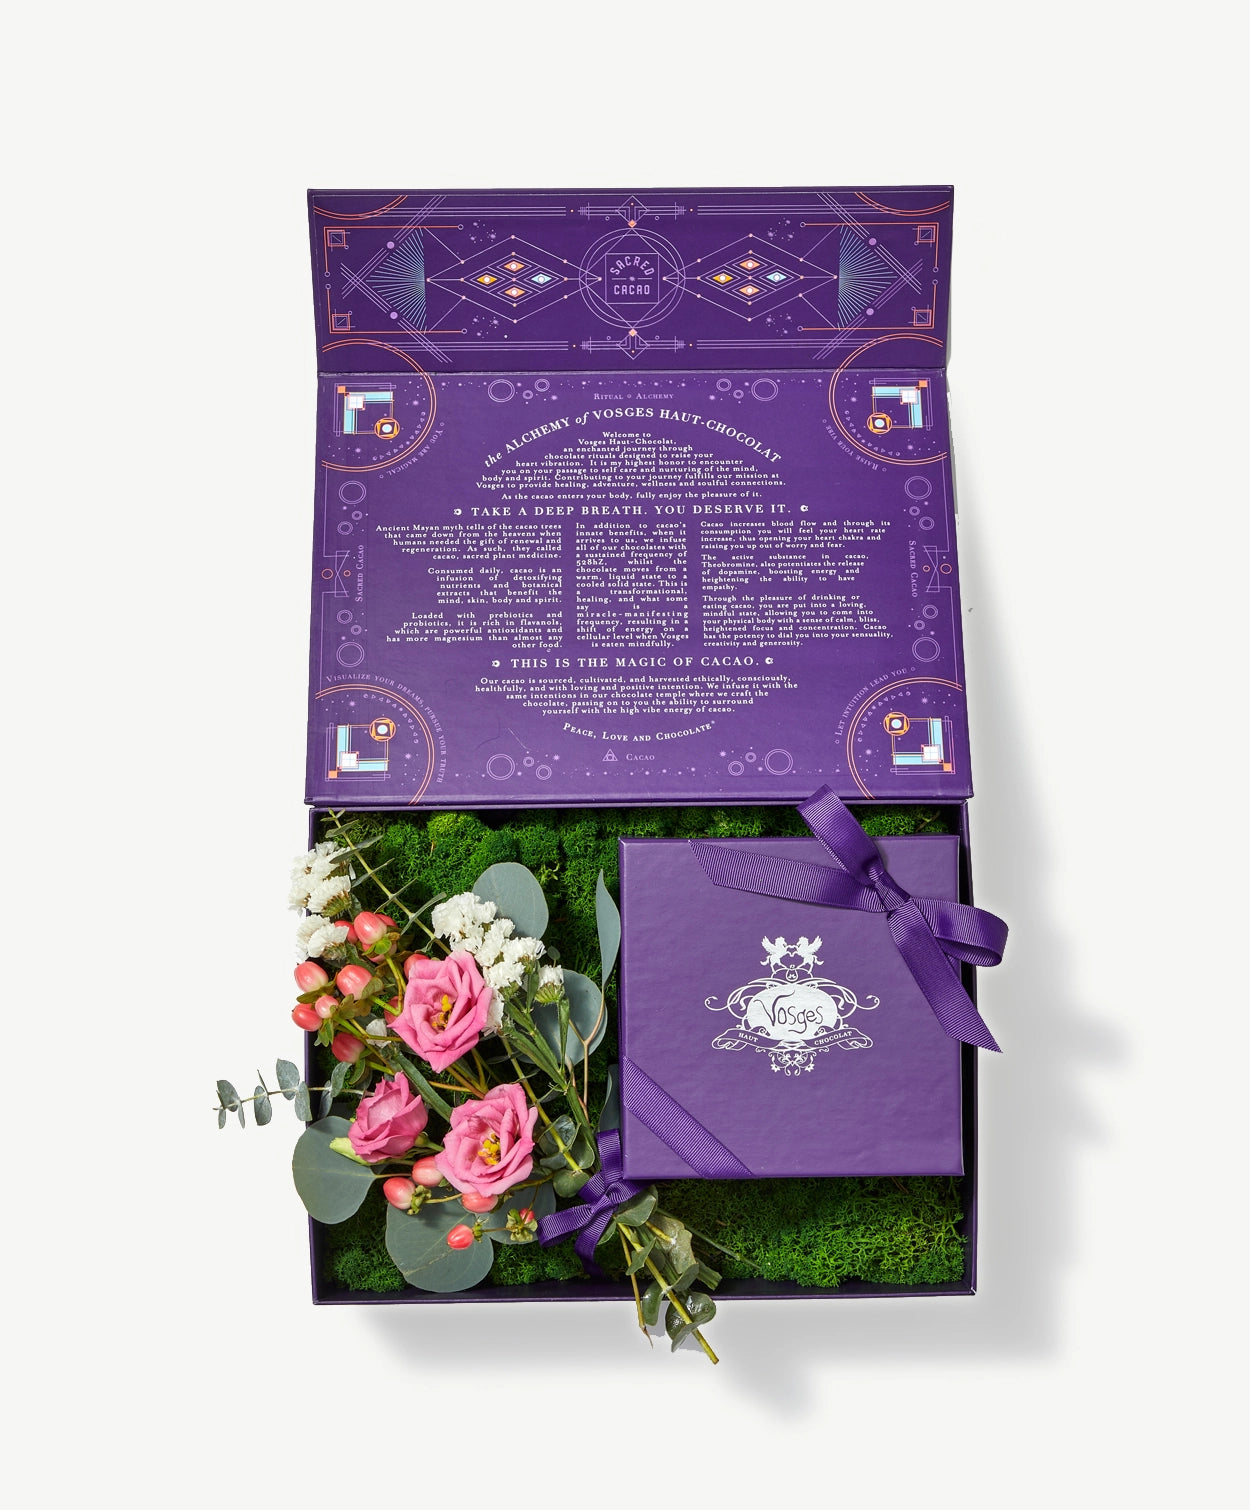 Purple box sits open containing green moss, pink and white flowers tied with a purple ribbon bow and a square Vosges truffle collection on a light grey background.